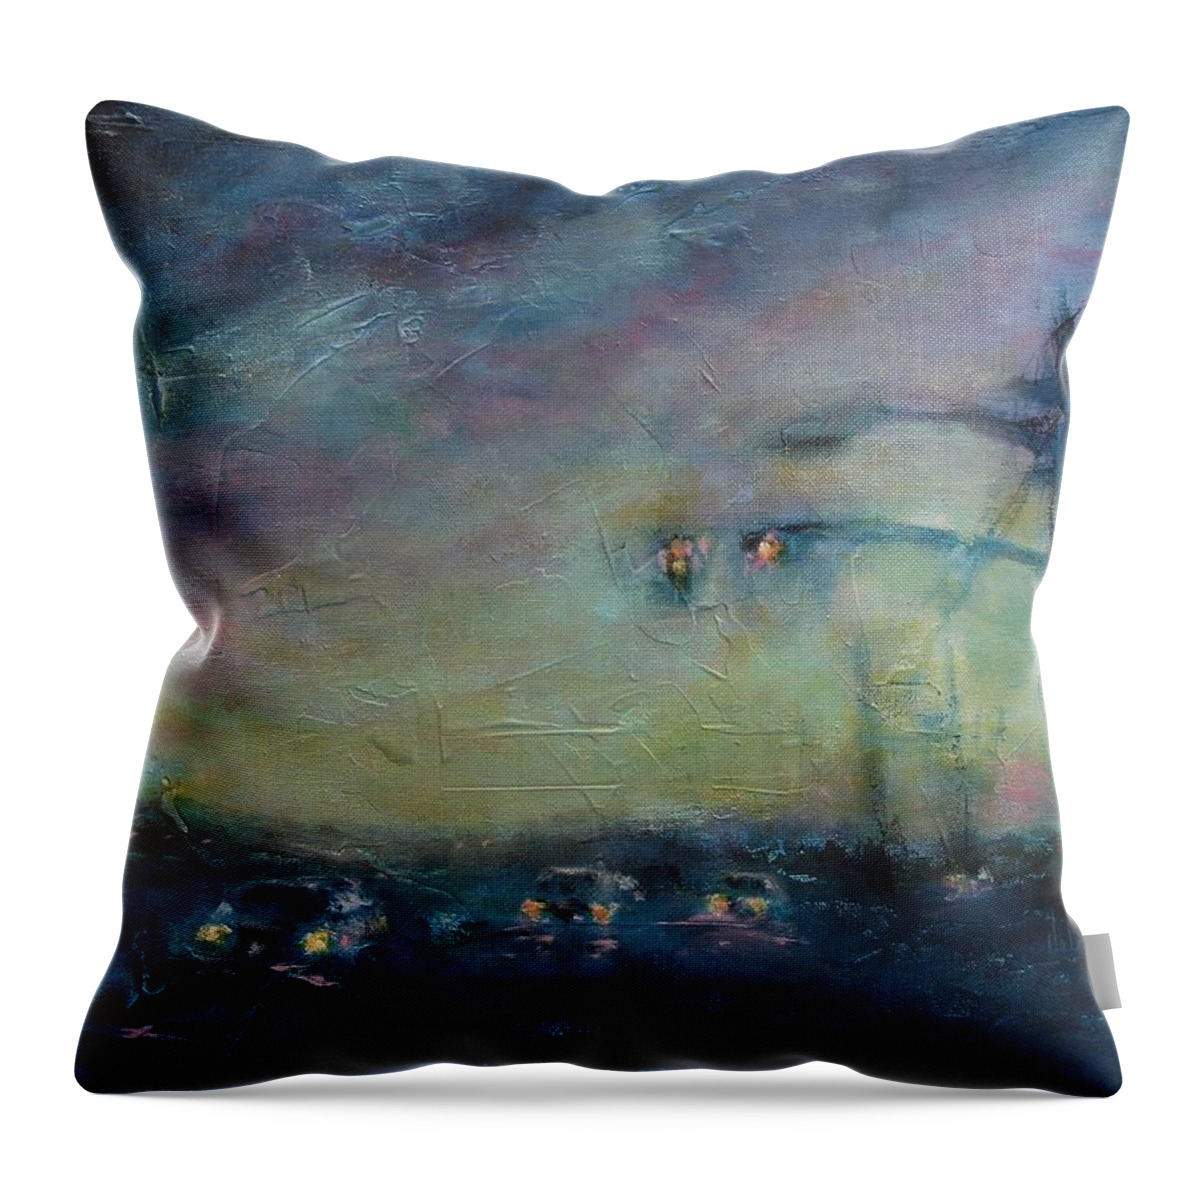 Night Scenes Throw Pillow featuring the painting Dusk by Valerie Greene